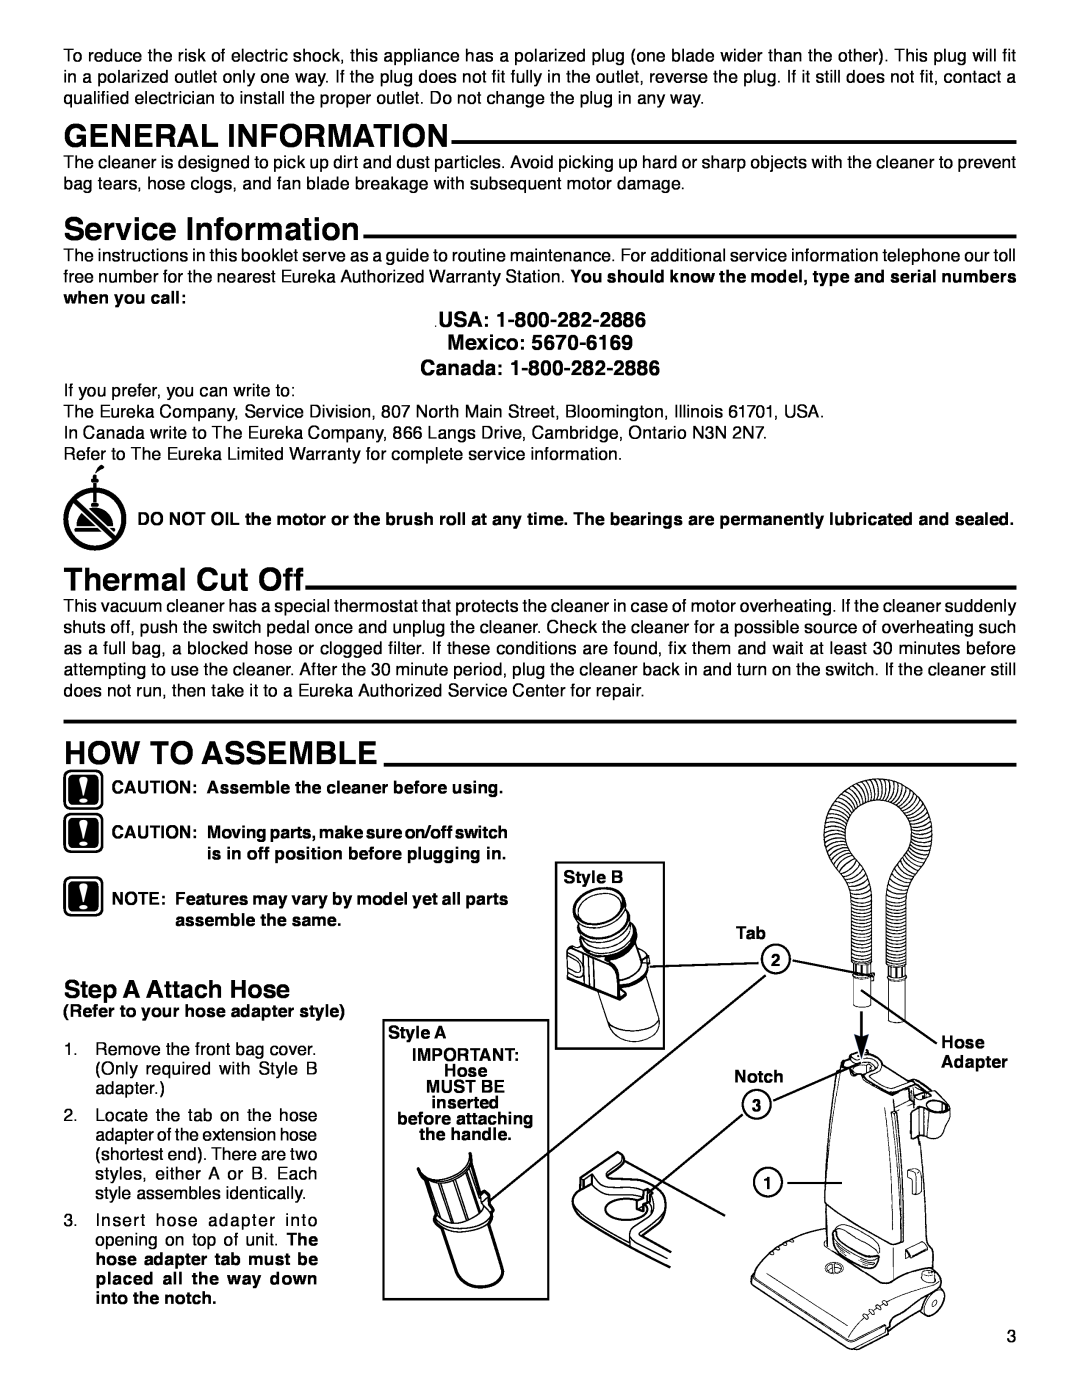 Eureka 4440 General Information, Service Information, Thermal Cut Off, How To Assemble, Step A Attach Hose, Style B, Notch 